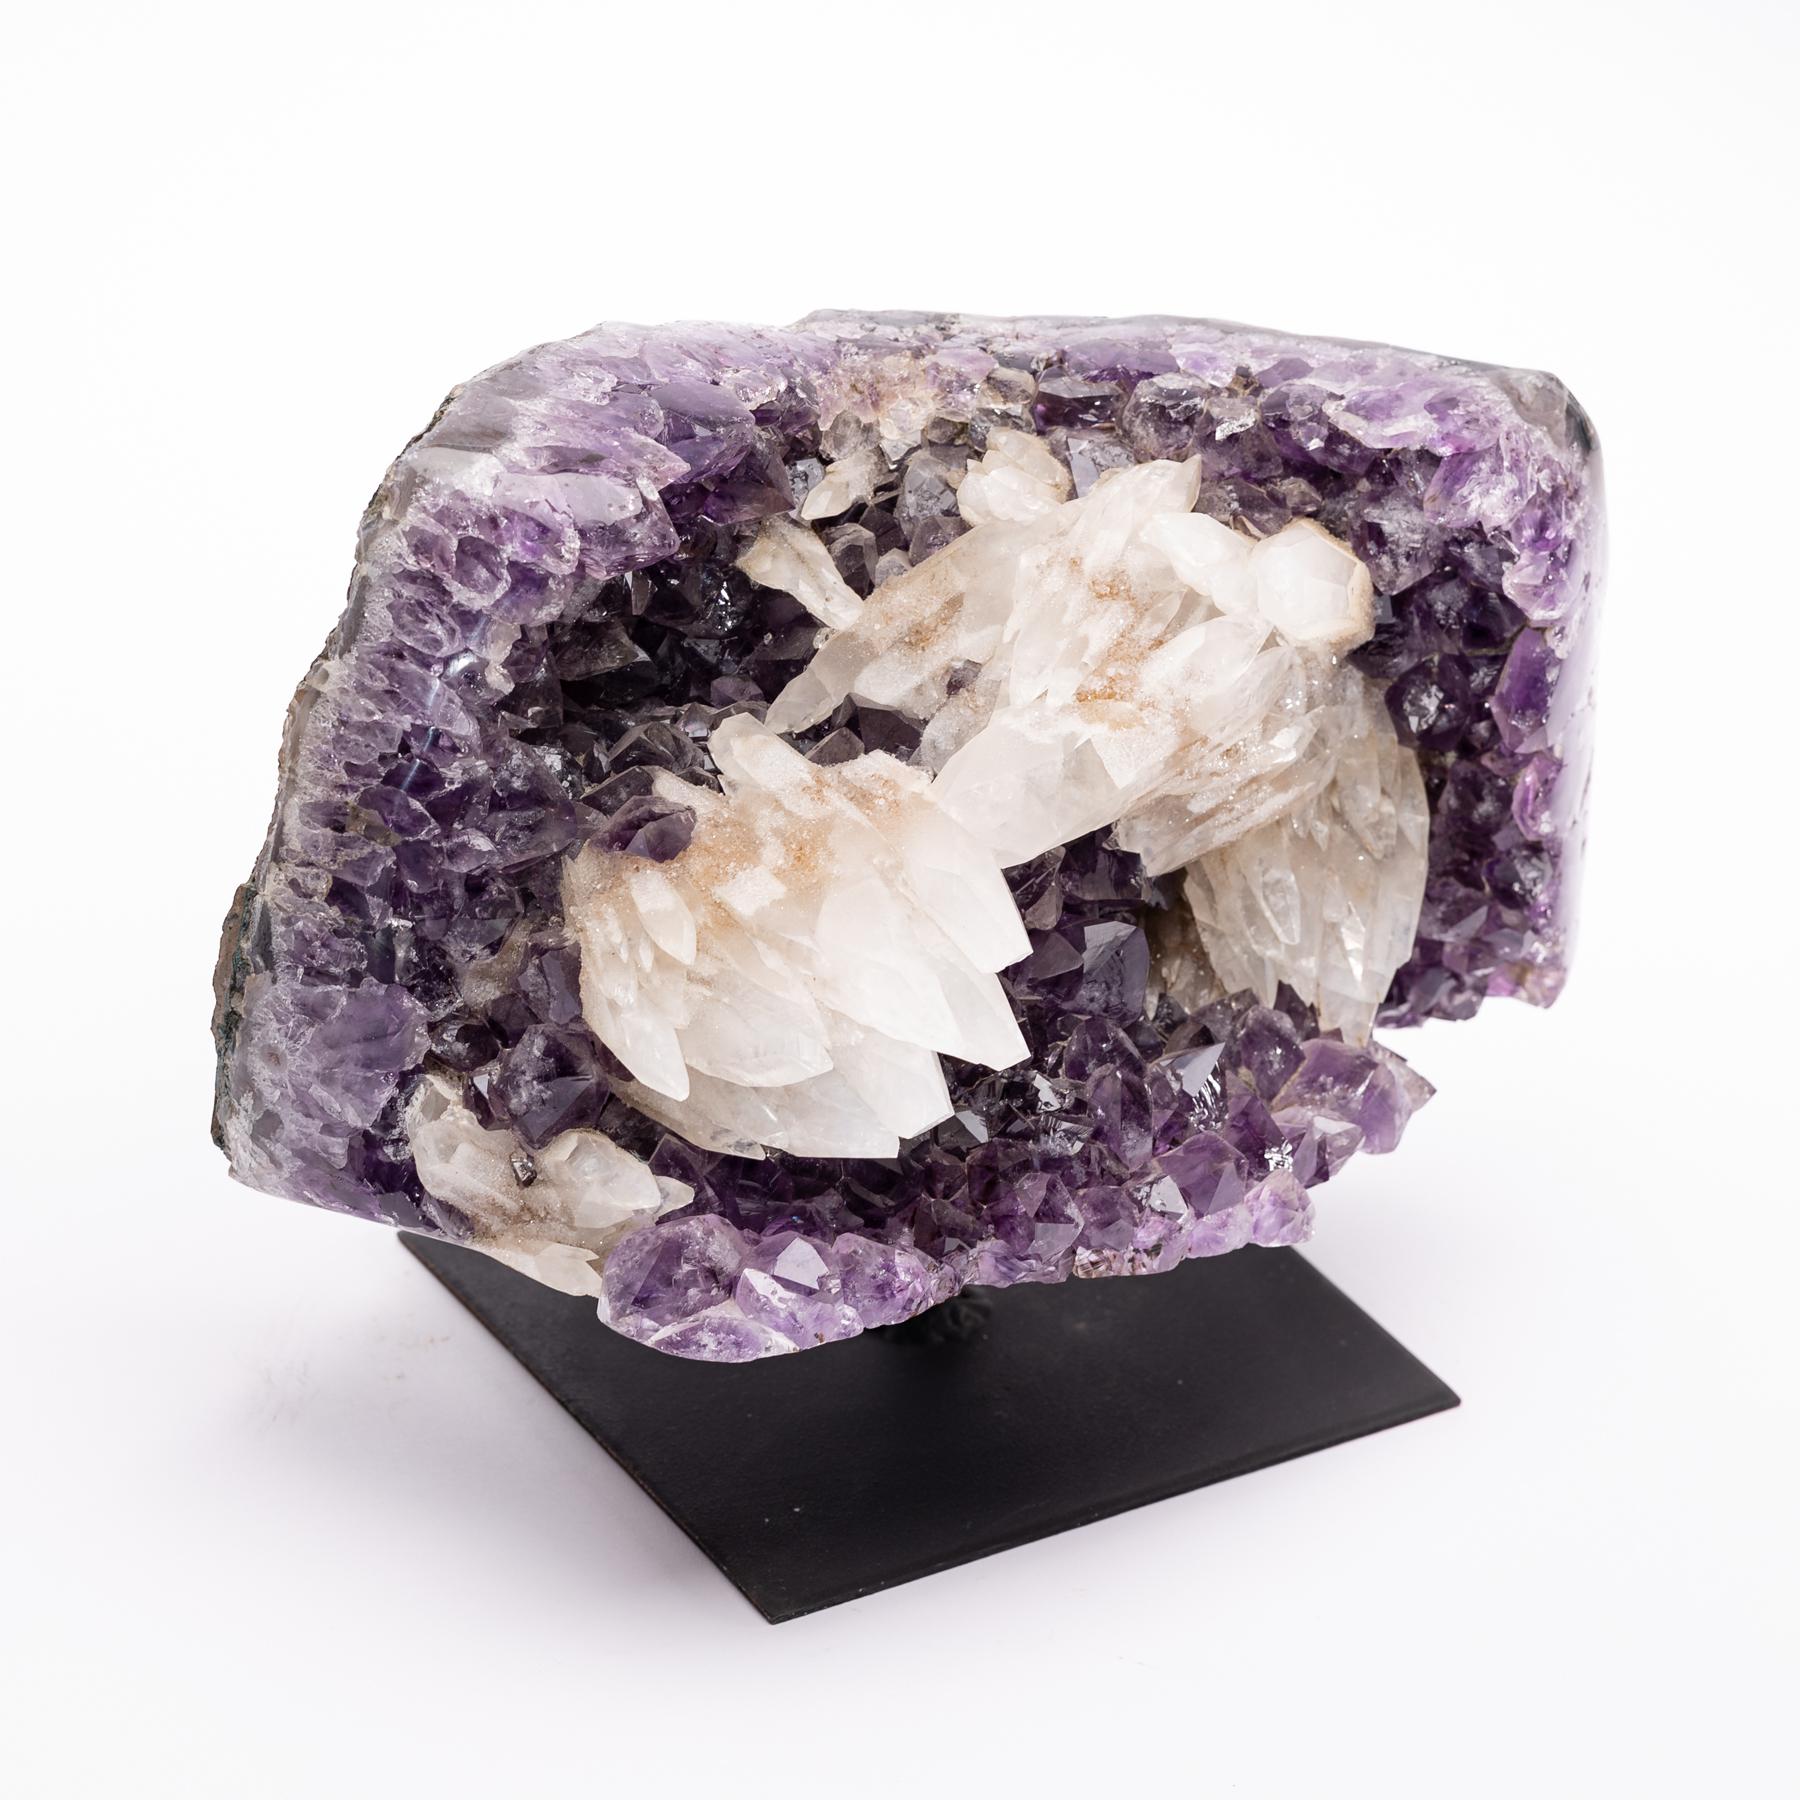 Afghan Amethyst Druse and Calcite Specimen Mounted on a Custom Metal Stand